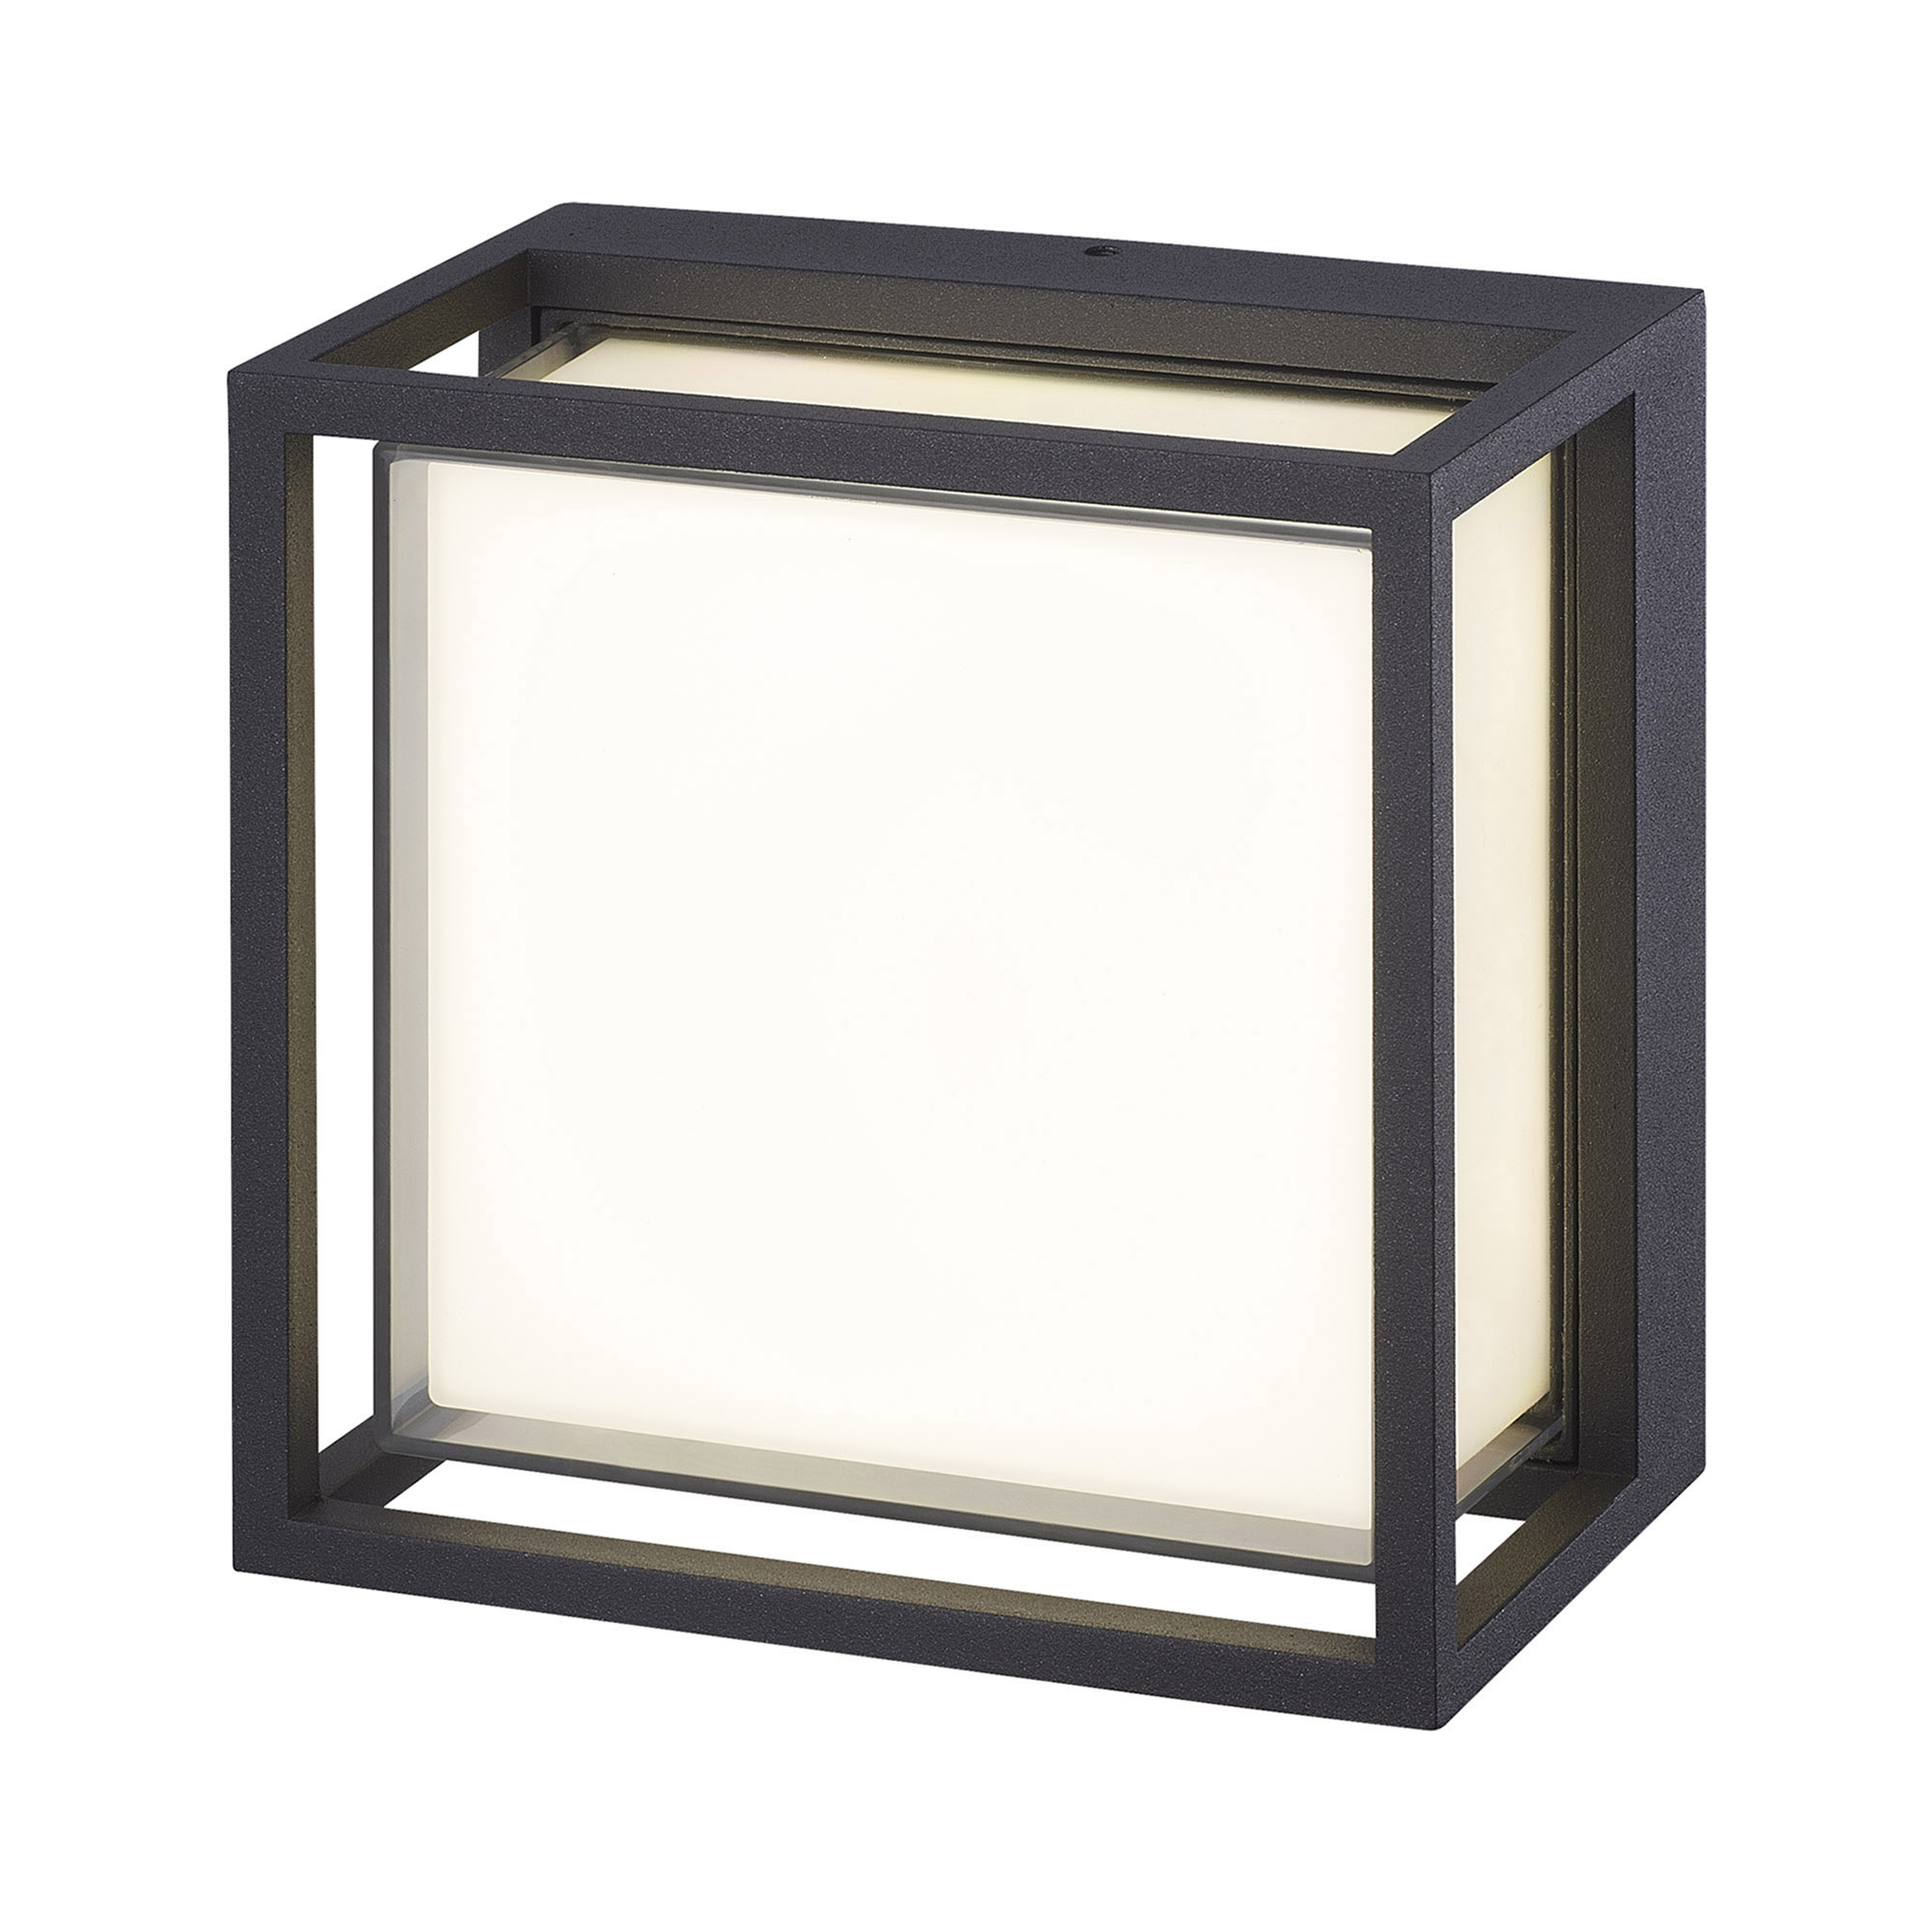 M7060  Chamonix Square Ceiling/Wall Light 9W LED IP65 Outdoor Anthracite